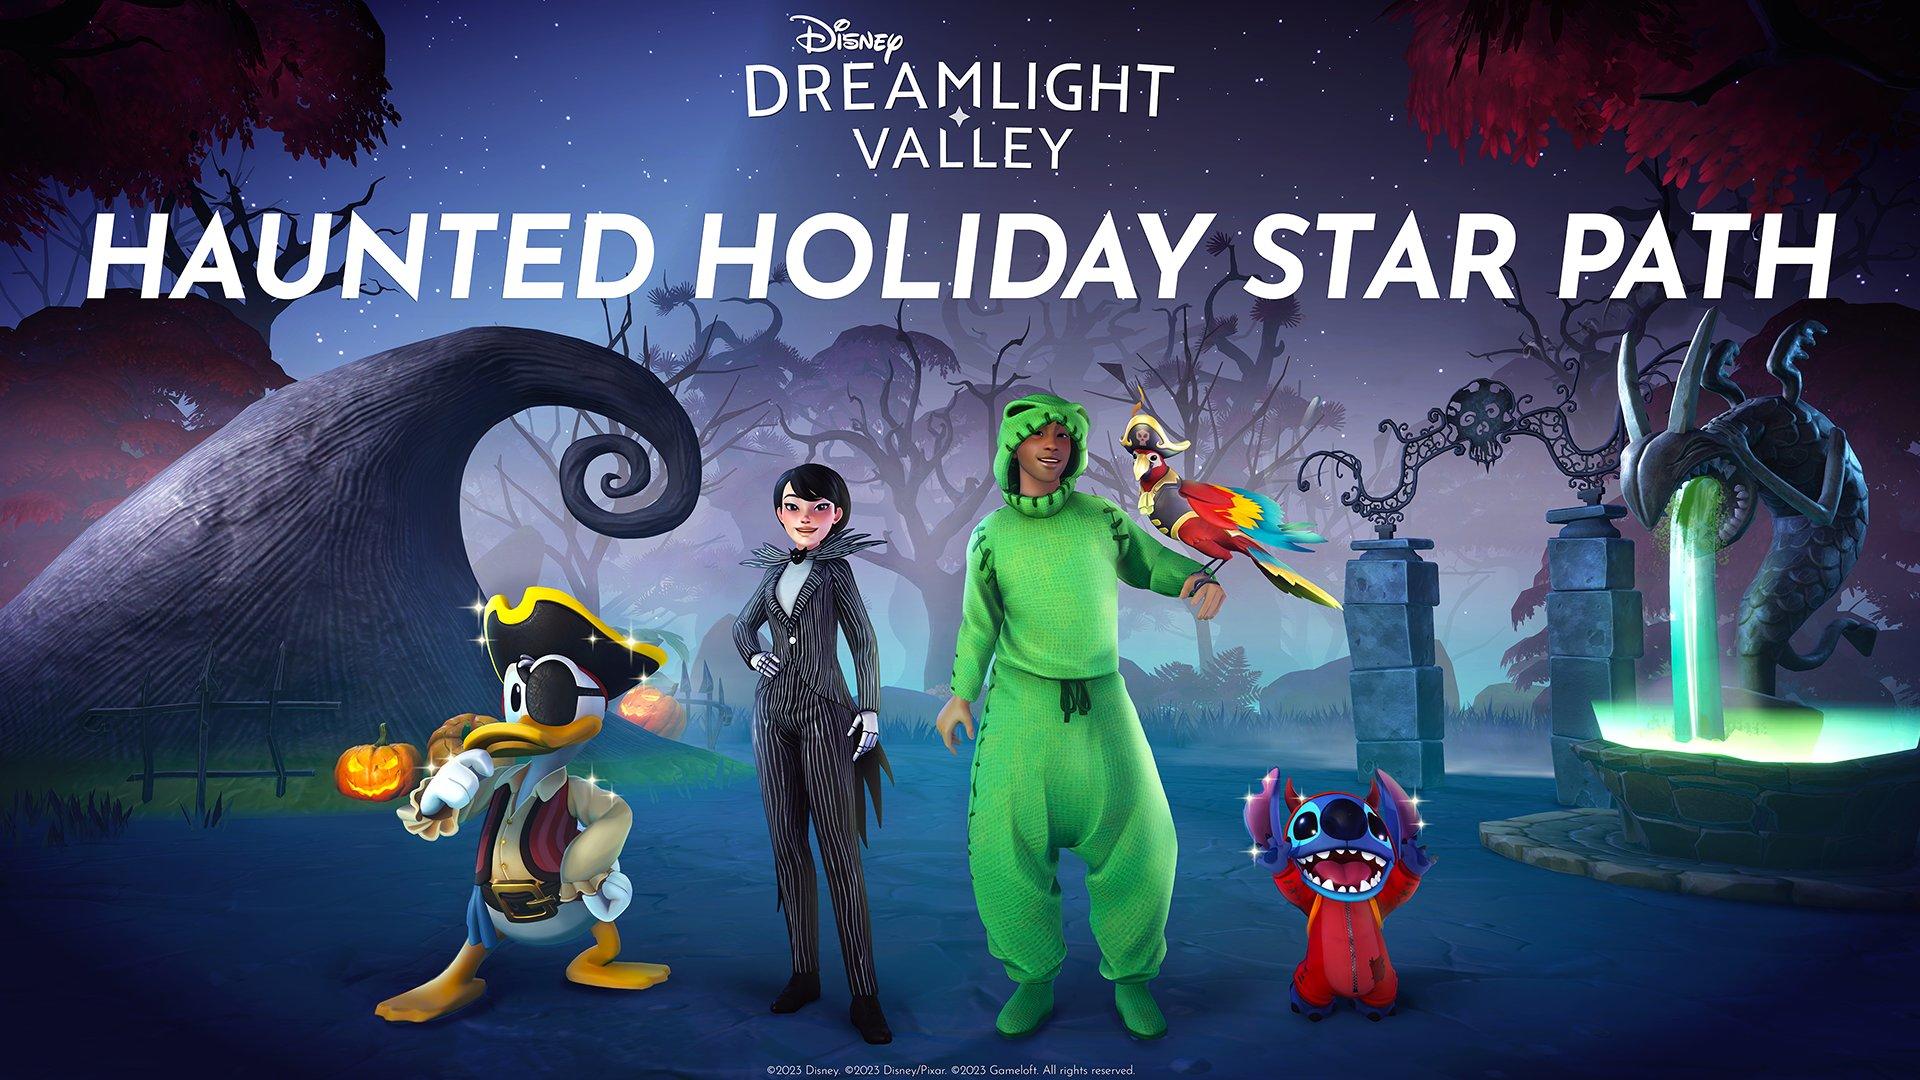 Theme Park Attractions Spice Up Disney Dreamlight Valley on PS5, PS4 This  Week